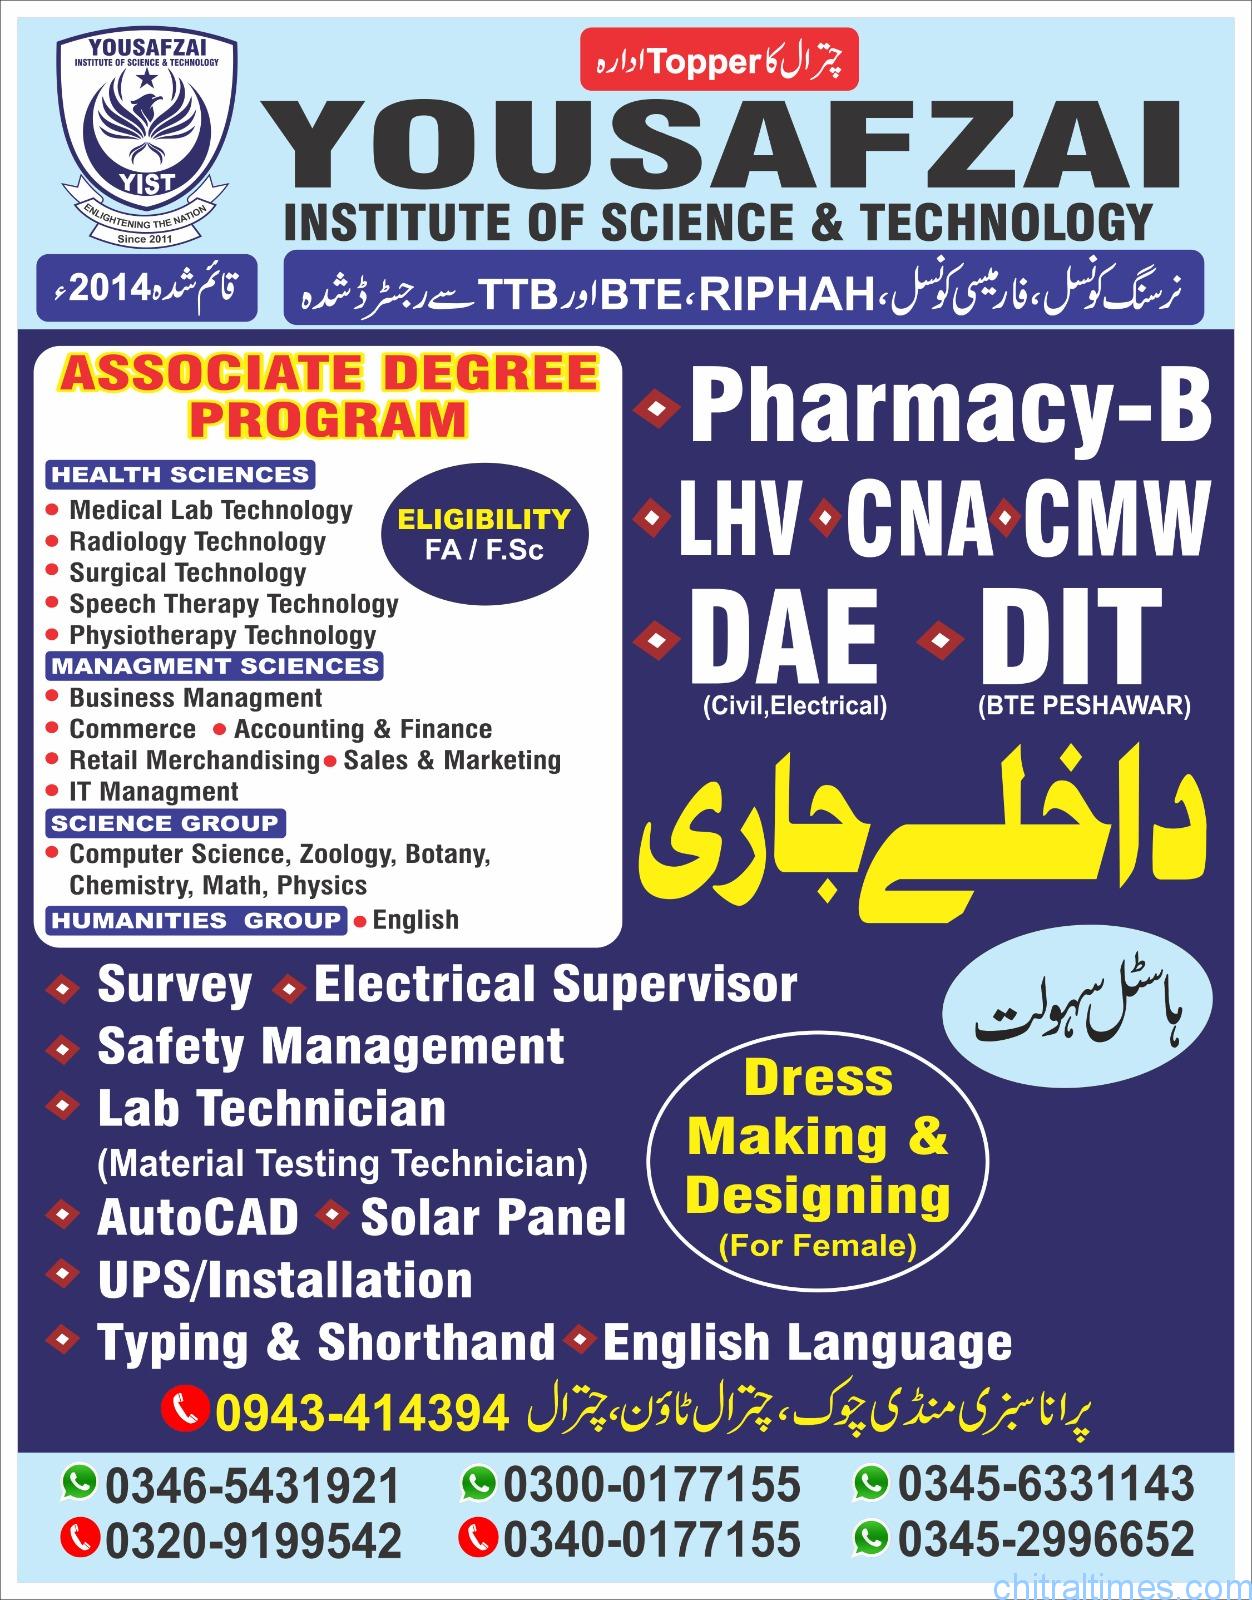 chitraltimes yousufzai college admission open